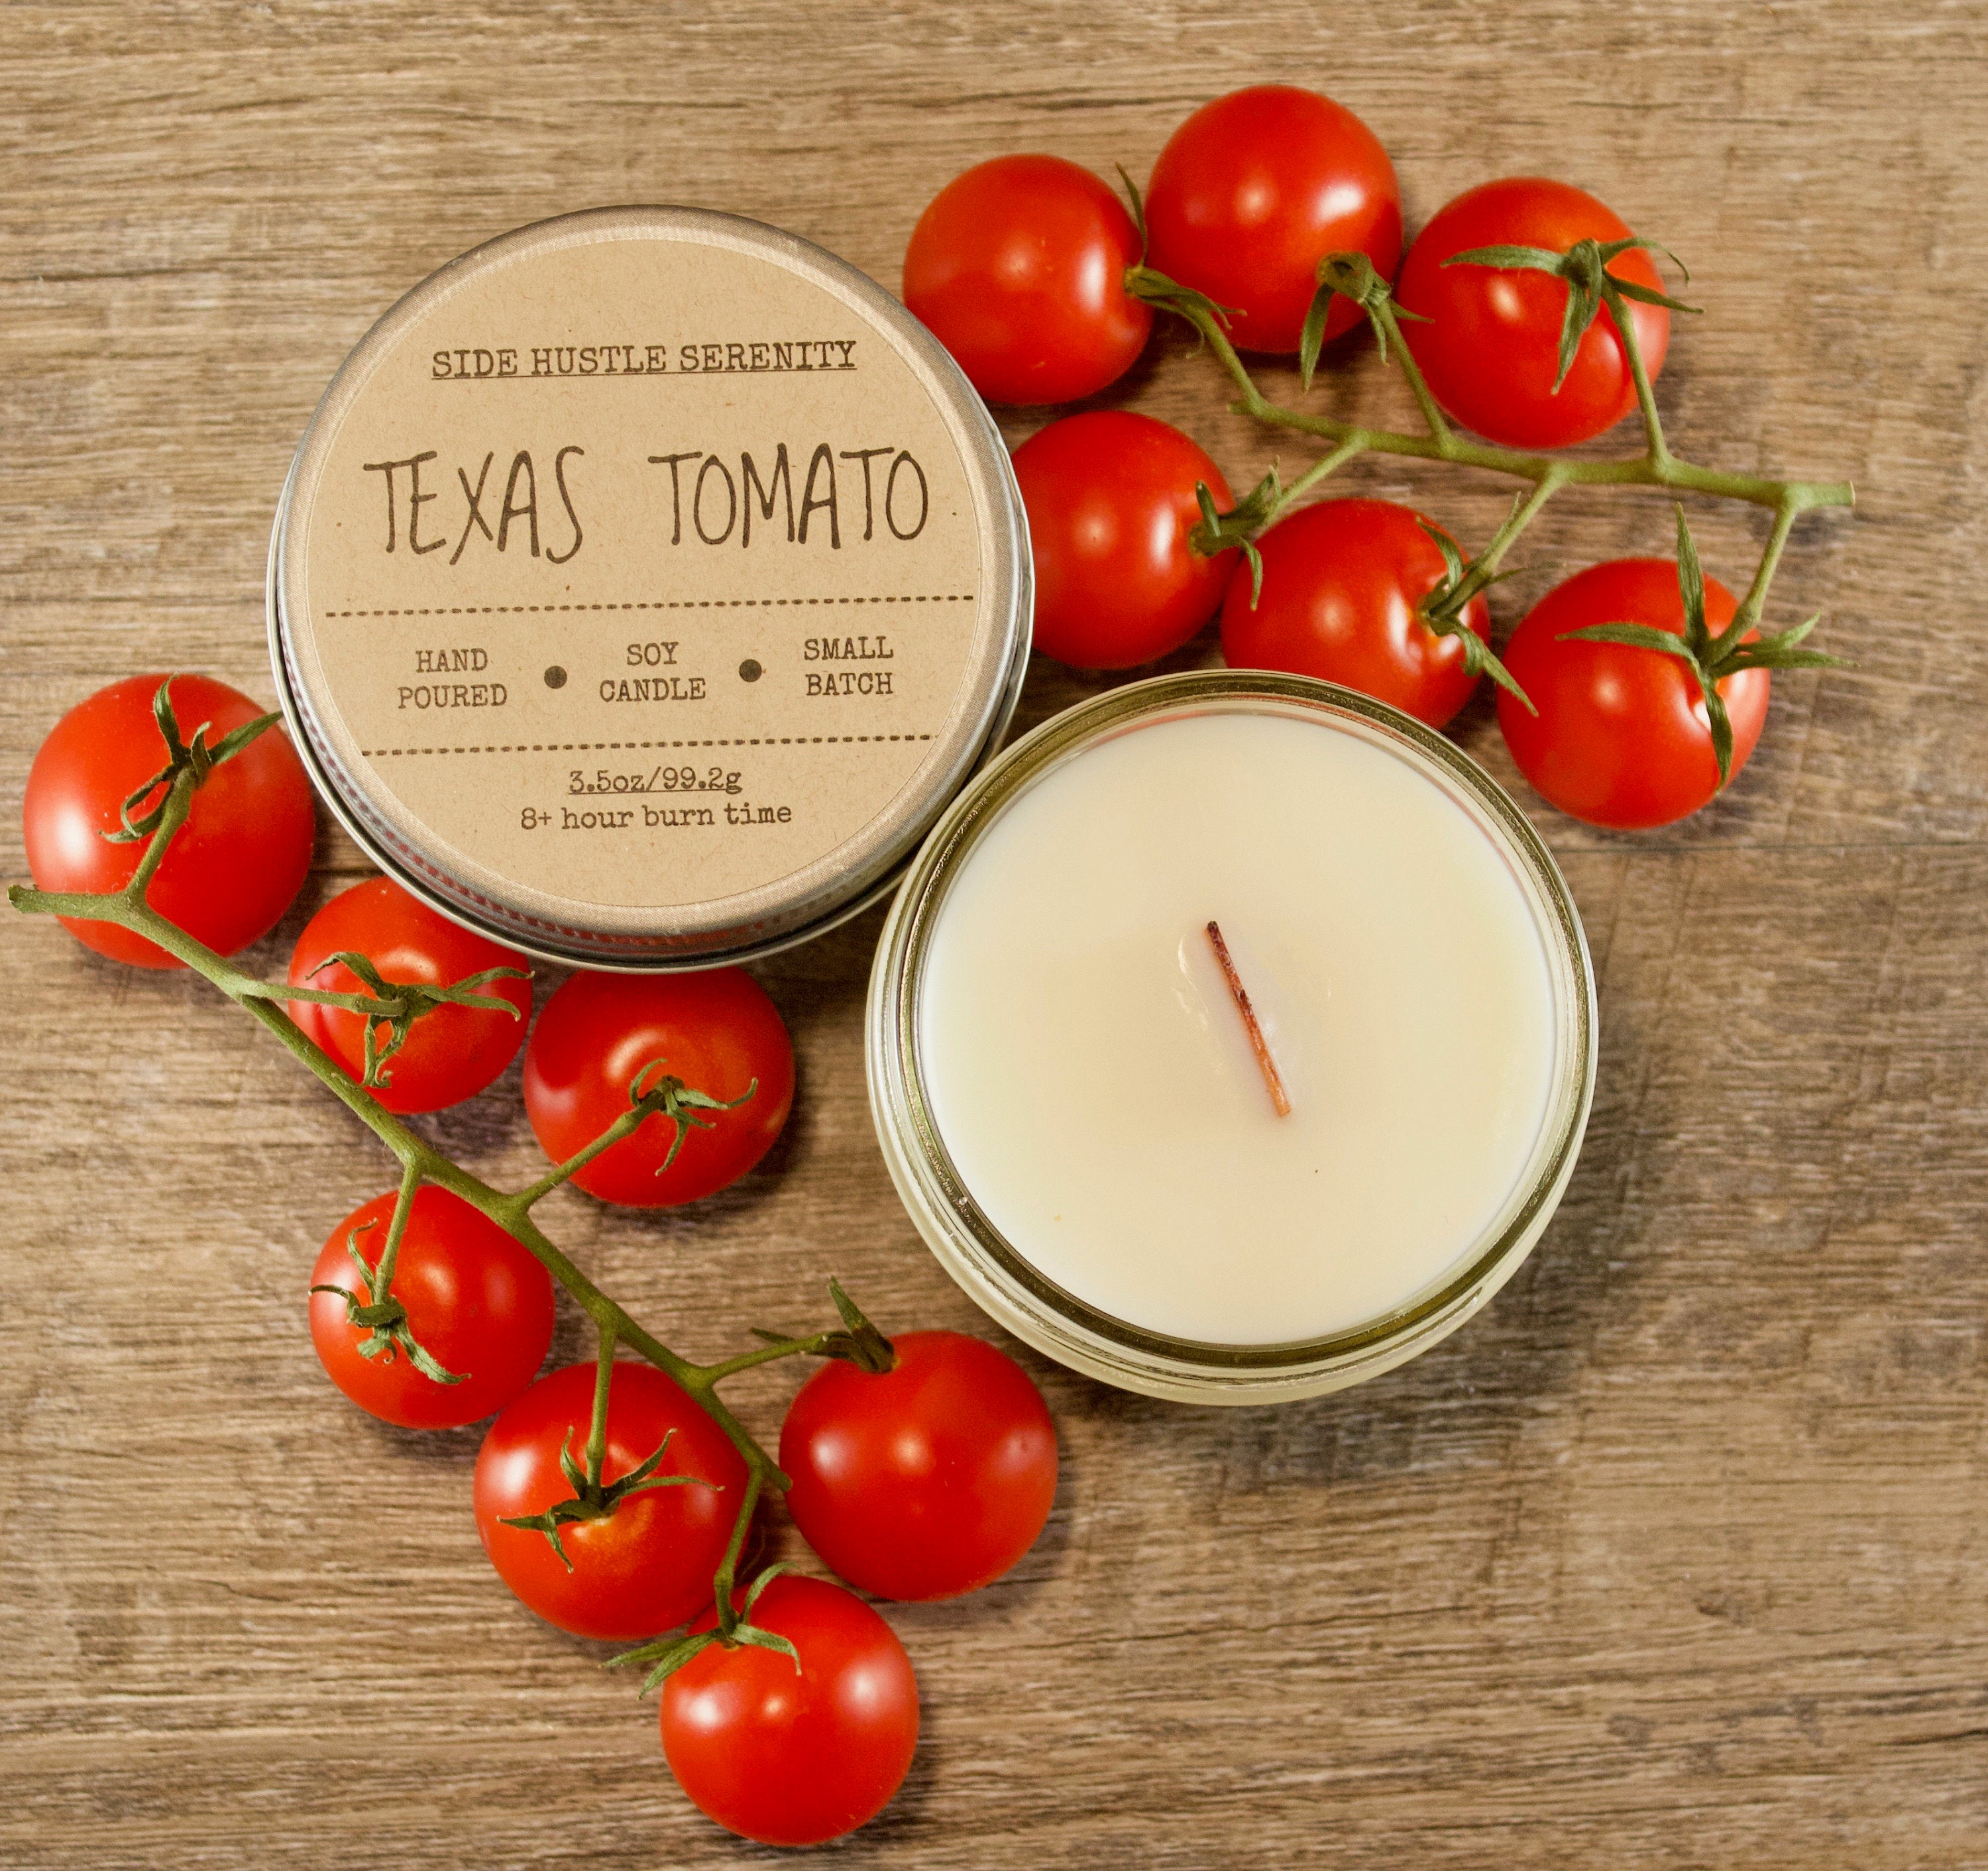 Texas Tomato | Tomato Leaf Scented Soy Candle - Side Hustle Serenity